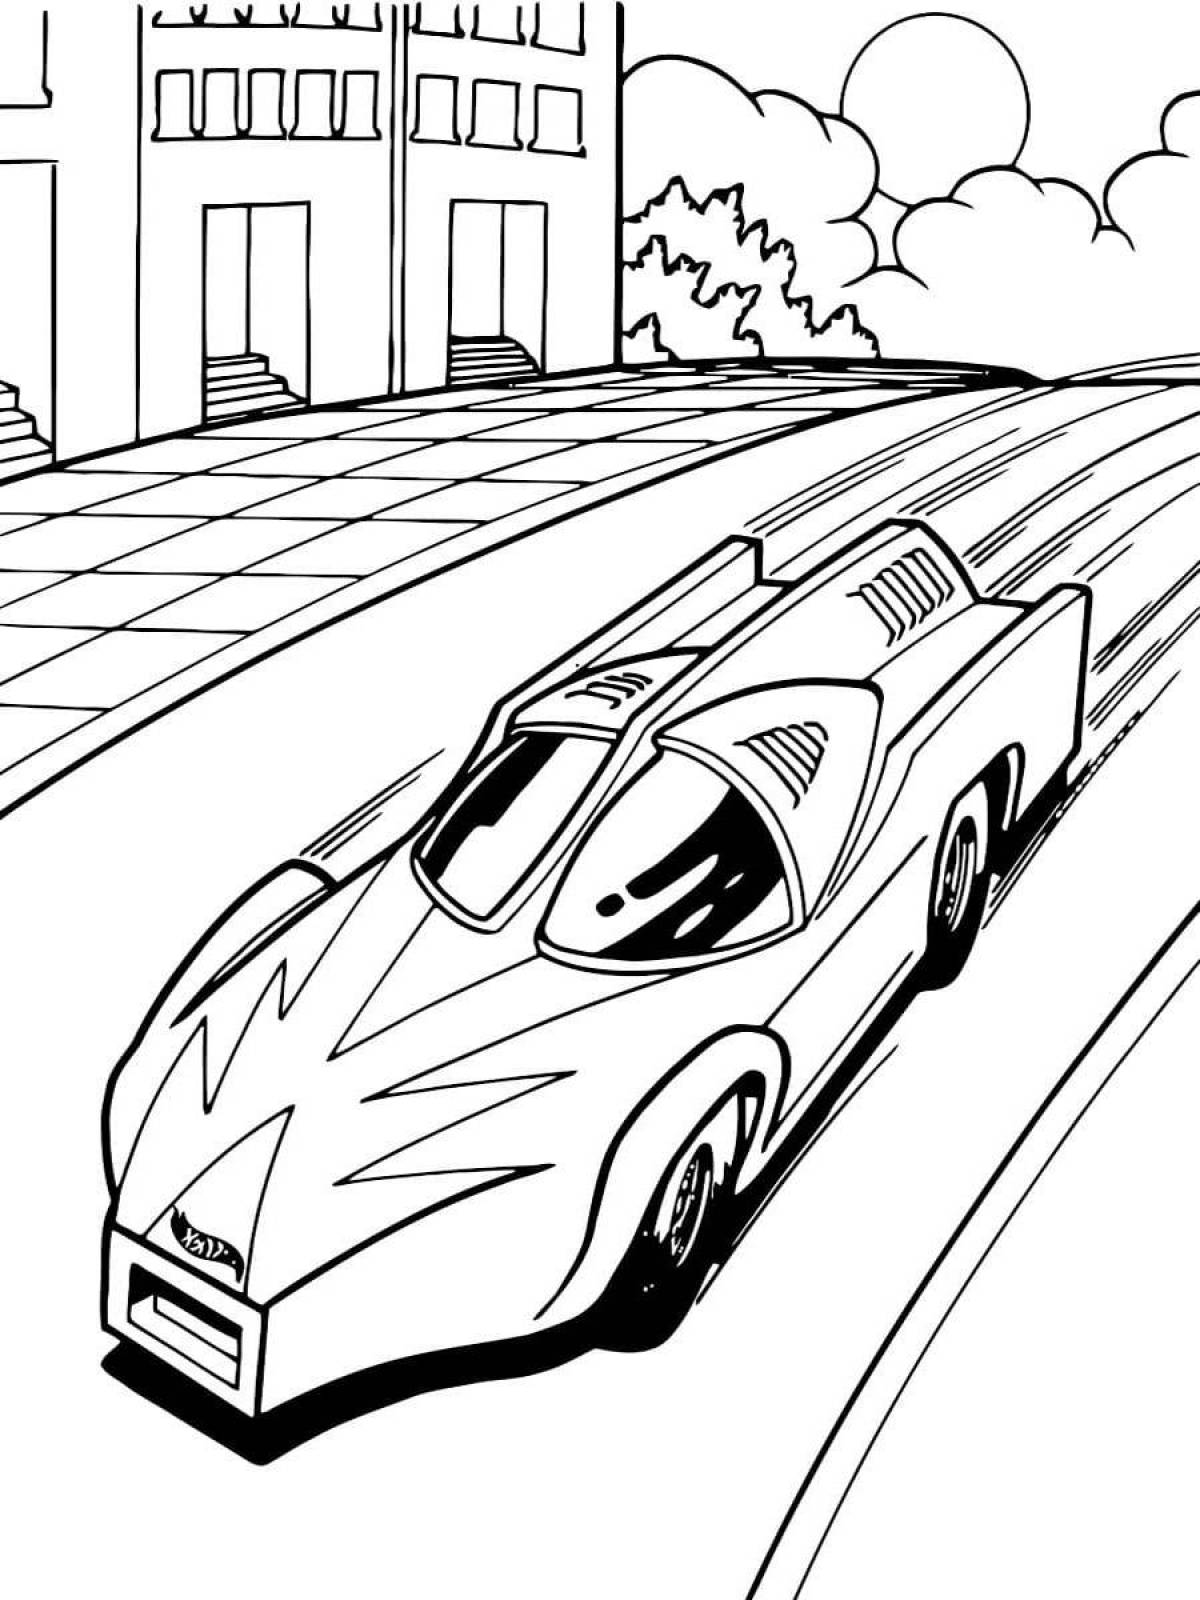 Daring hot wheels coloring pages for kids